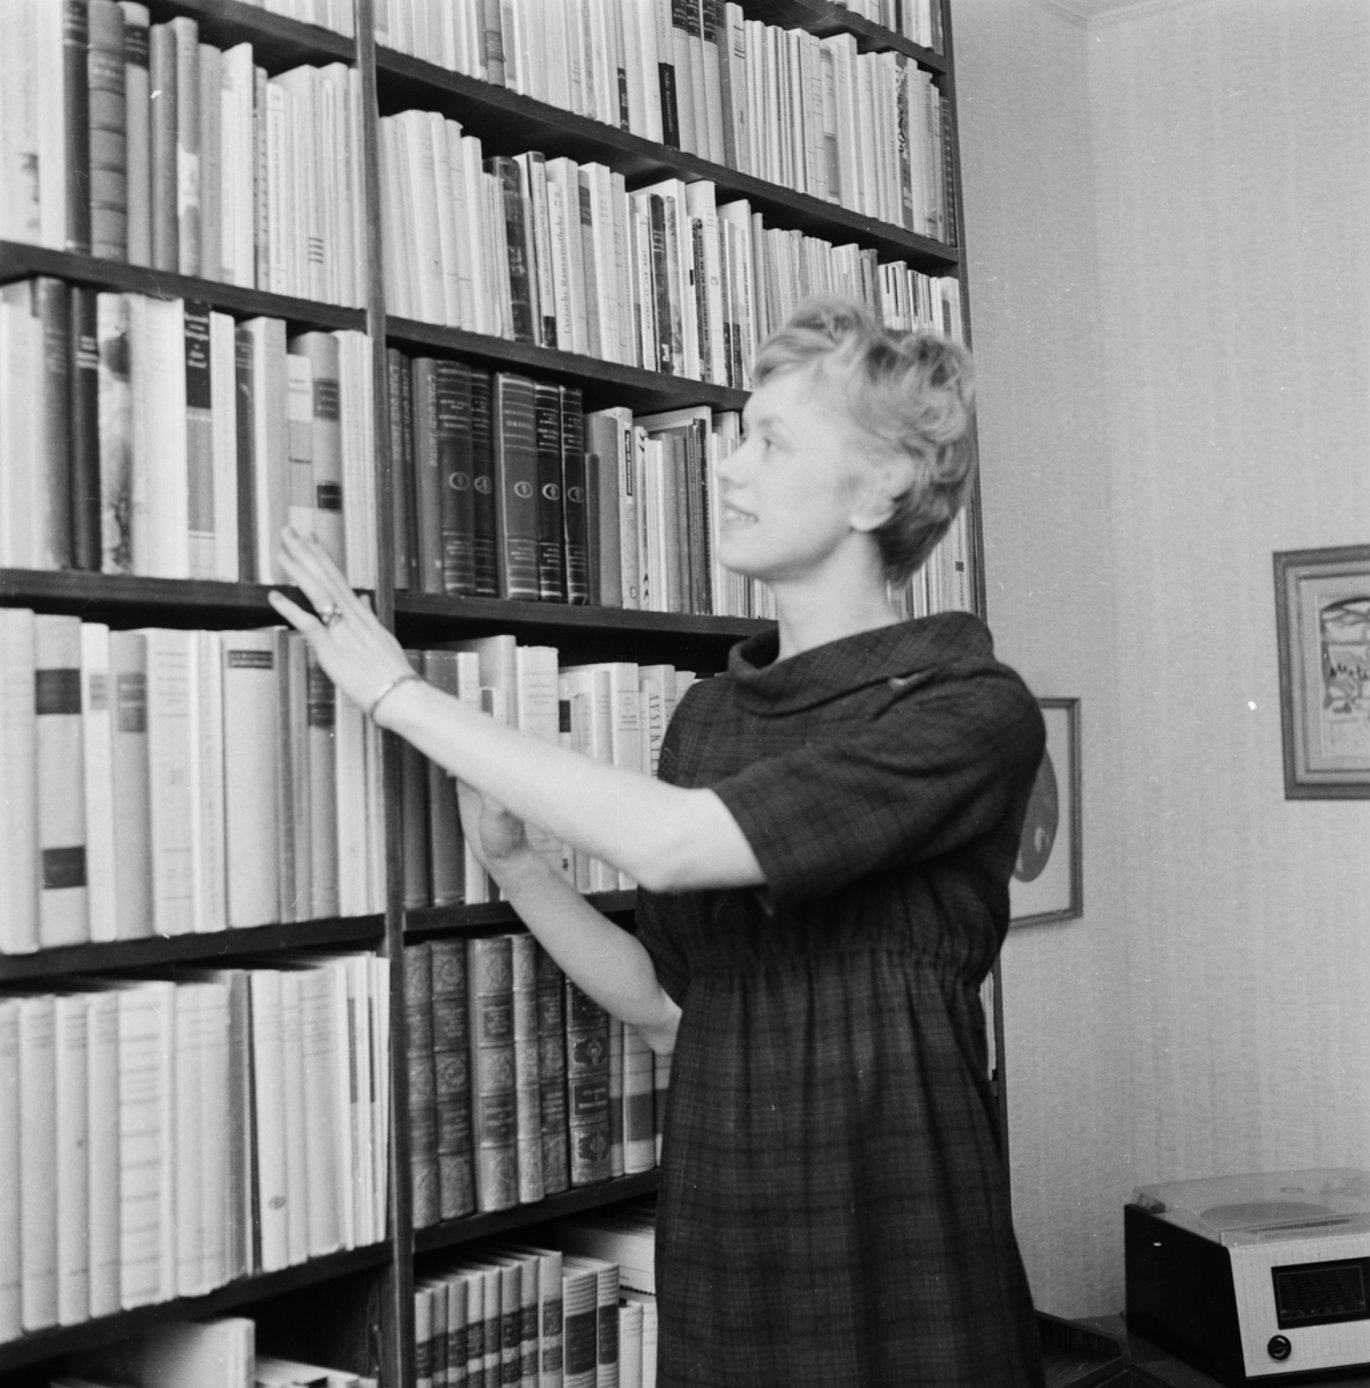 Black and white photograph of a lighthaired young woman reaching for a book from a bookshelf